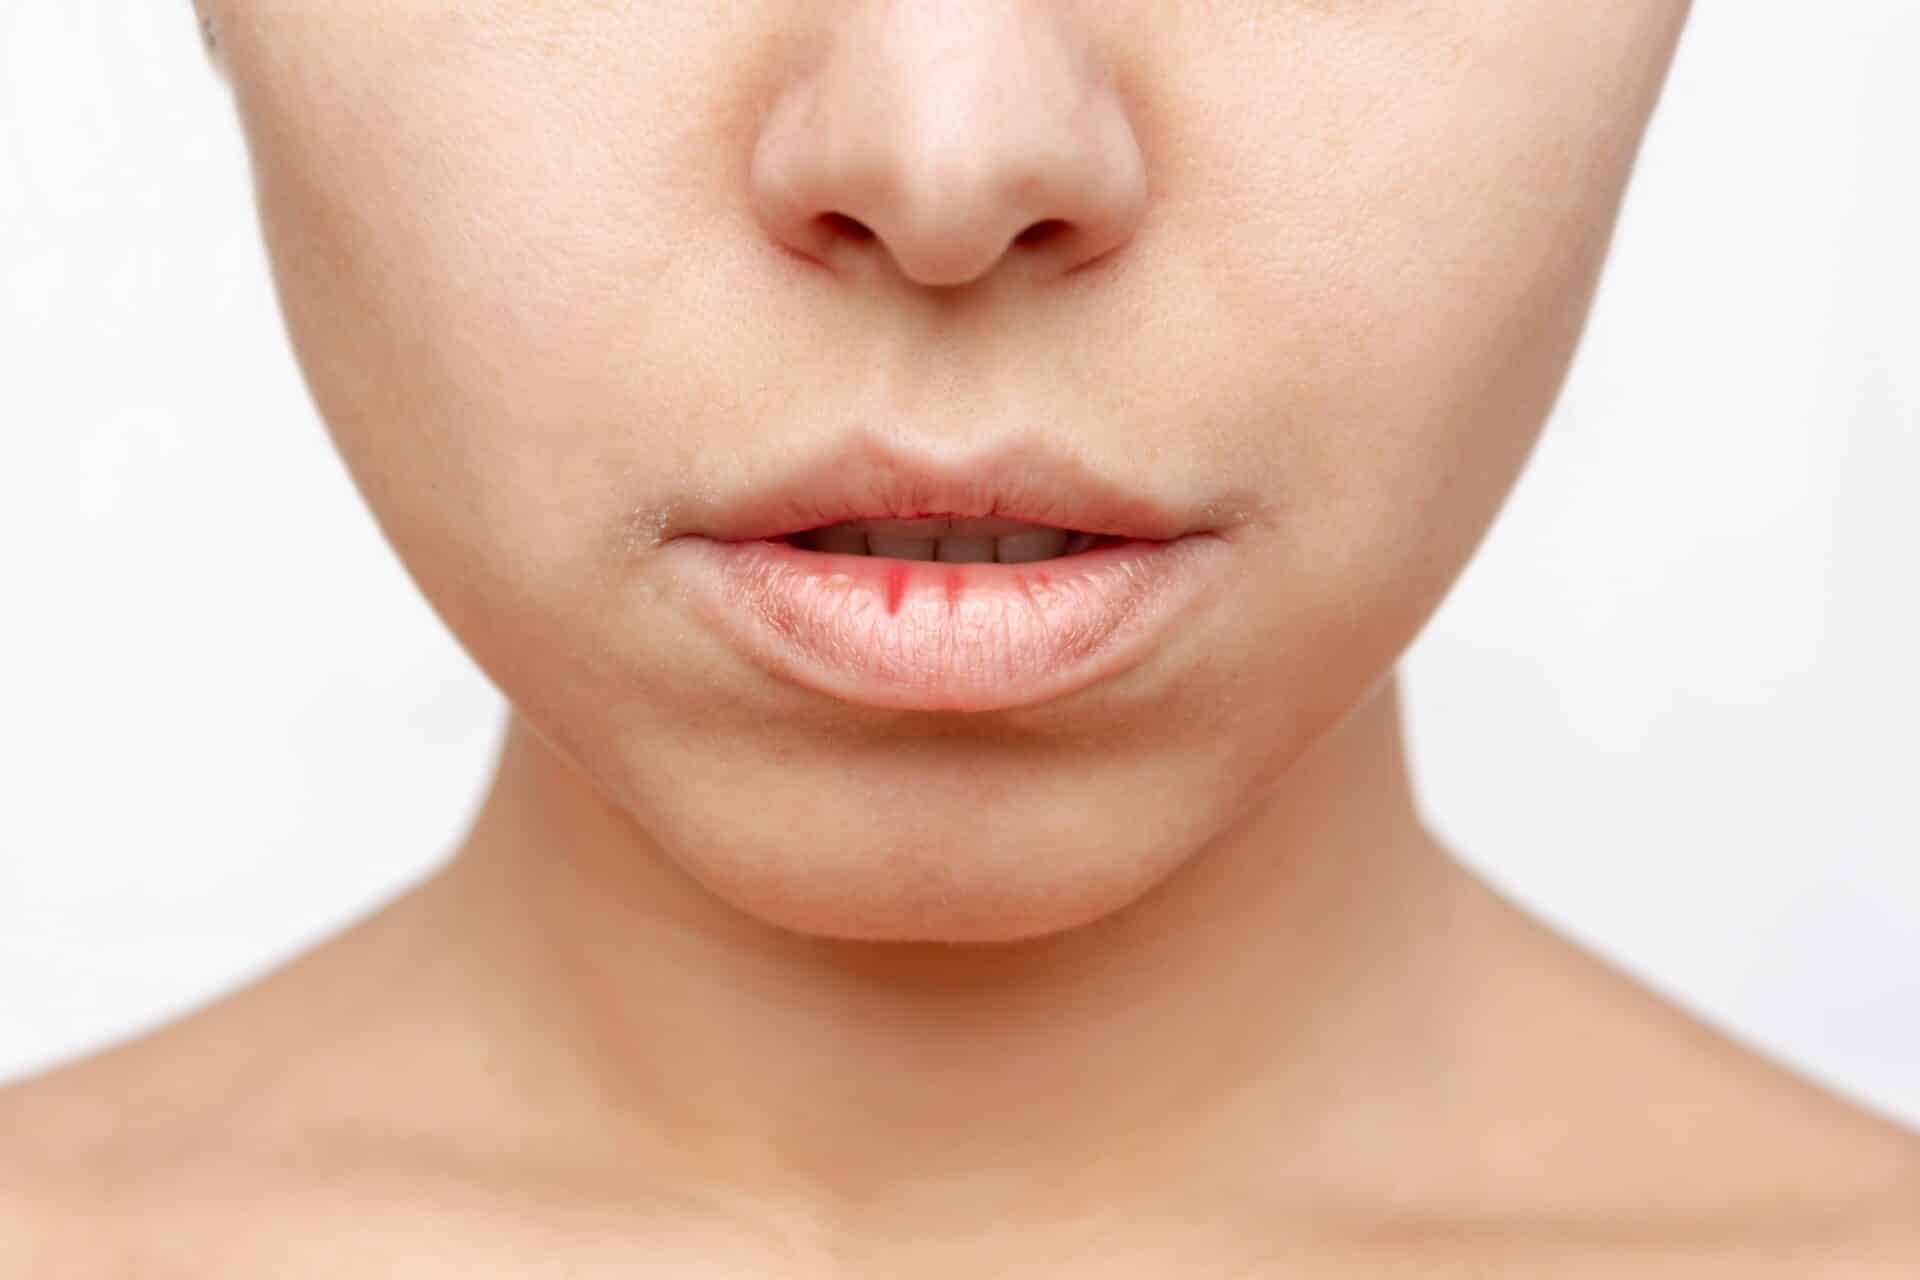 Close up image of a woman's face with dry lips.